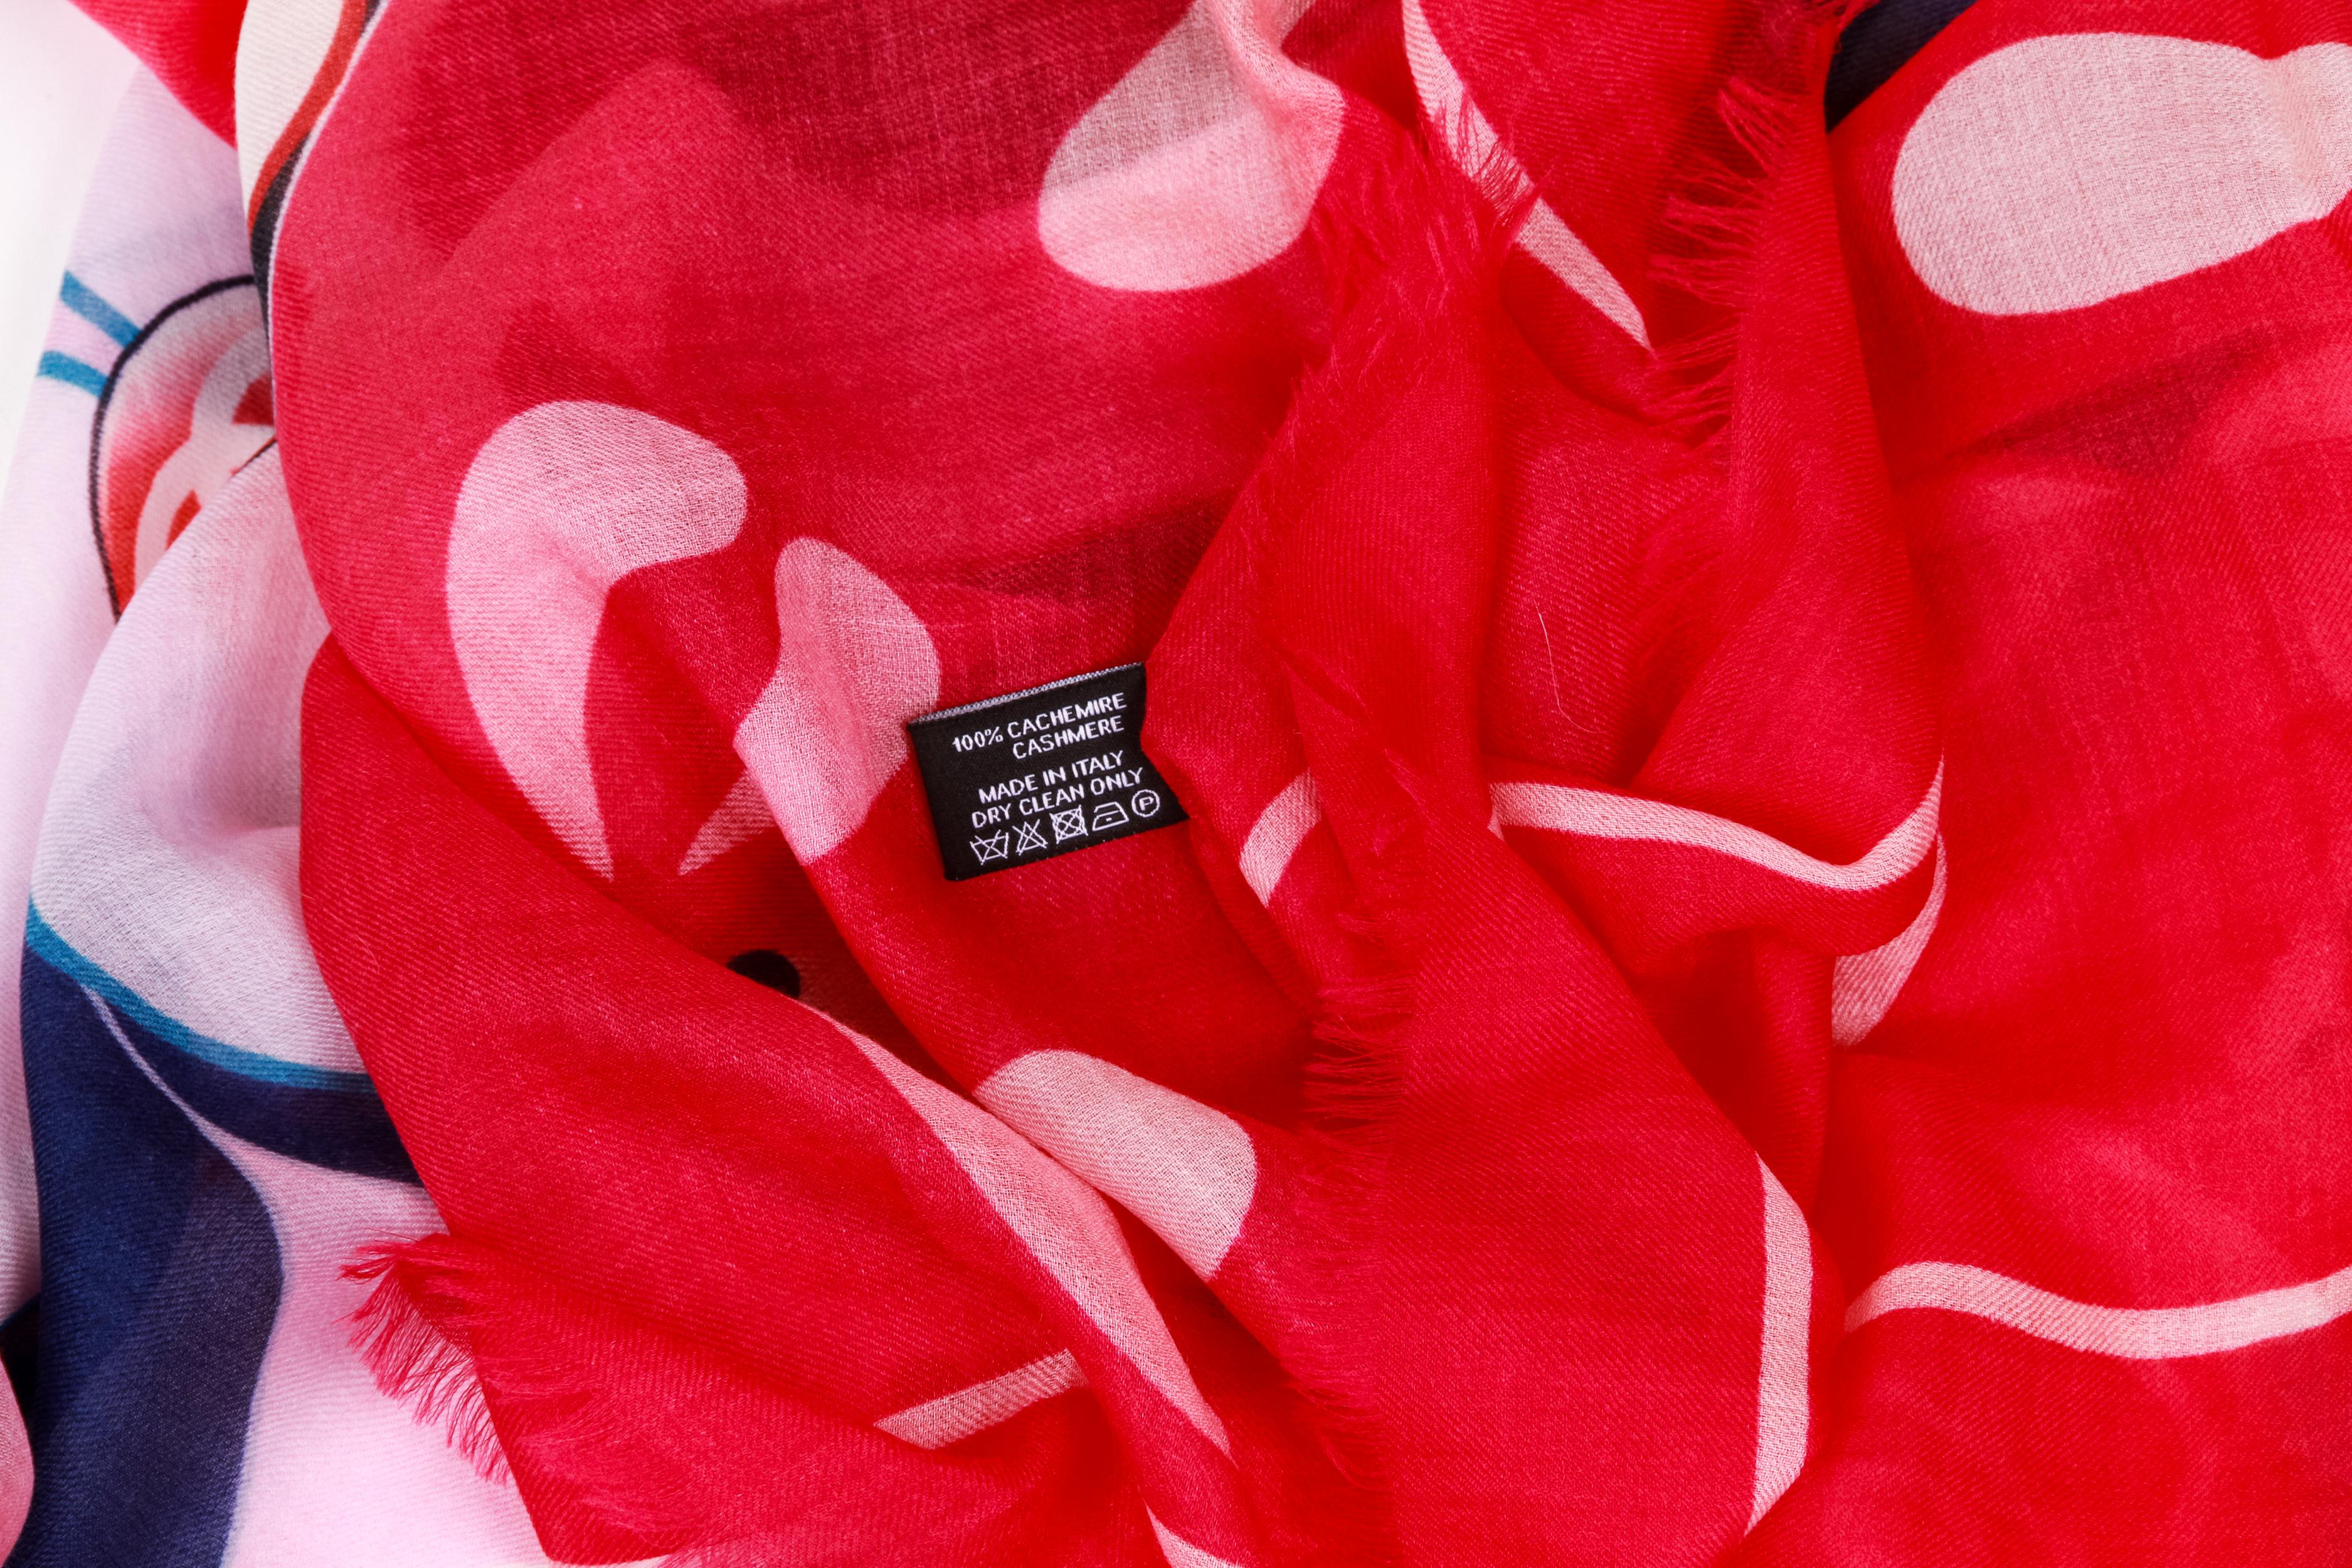  New Chanel Floral Graphic Red Cashmere Shawl Scarf 54